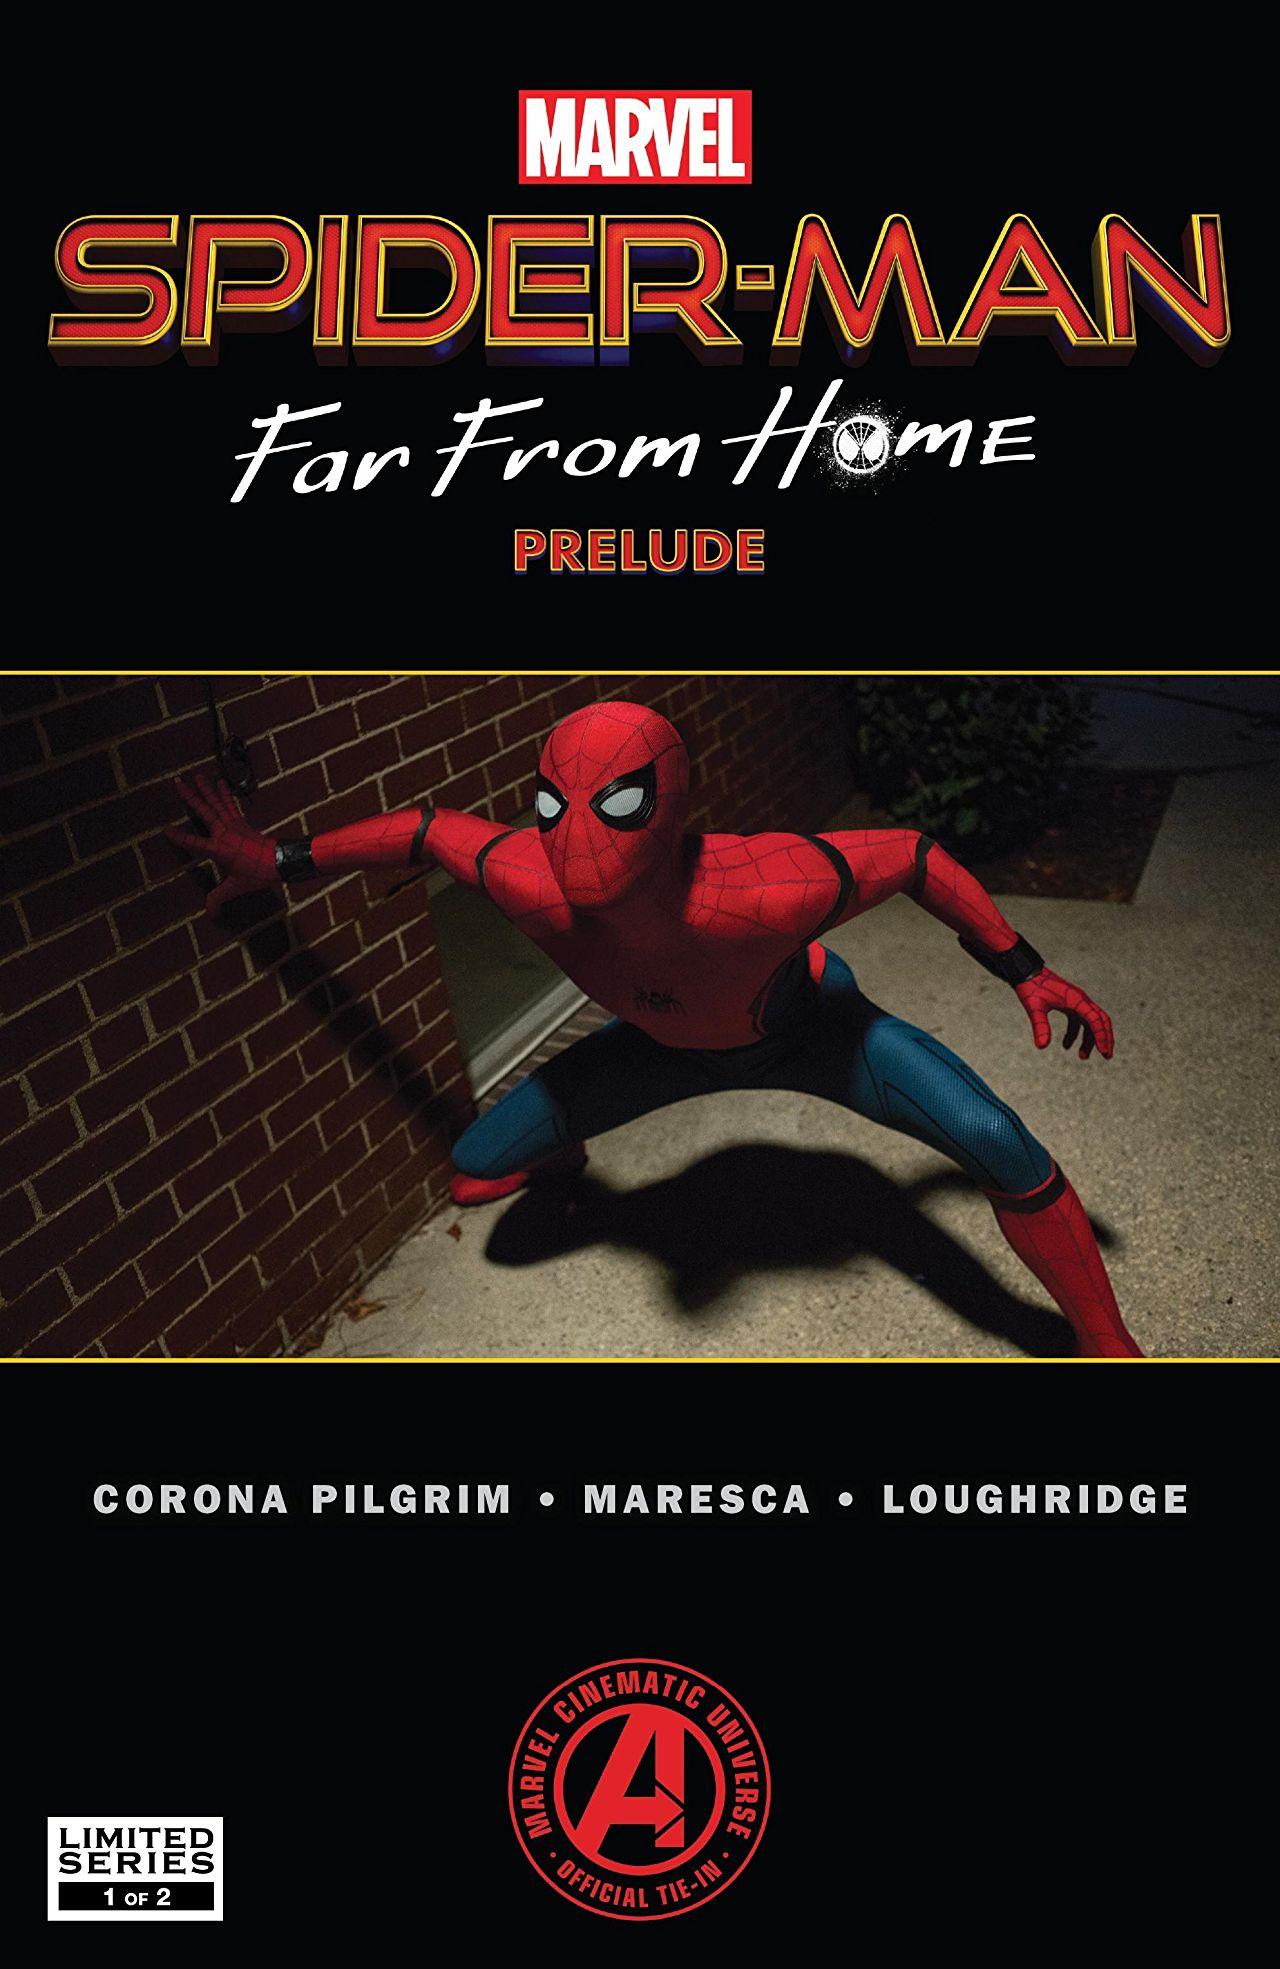 Marvel's Spider-Man: Far From Home Prelude Vol. 1 #1